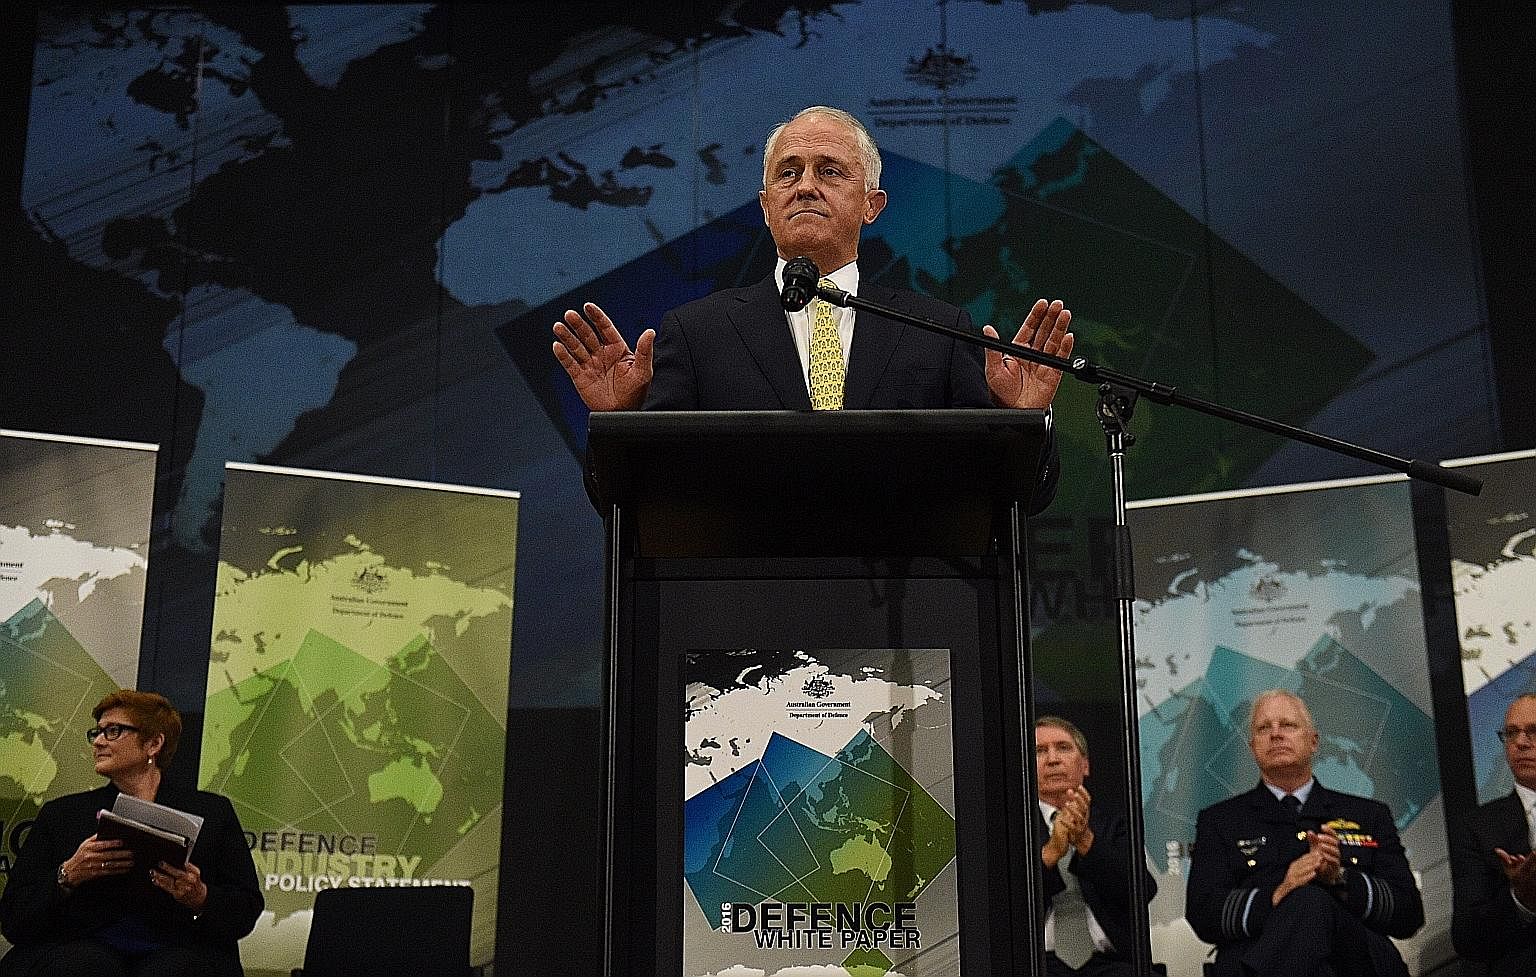 Prime Minister Malcolm Turnbull speaking during the presentation of the Defence White Paper at the Australian Defence Force Academy in Canberra last Thursday.